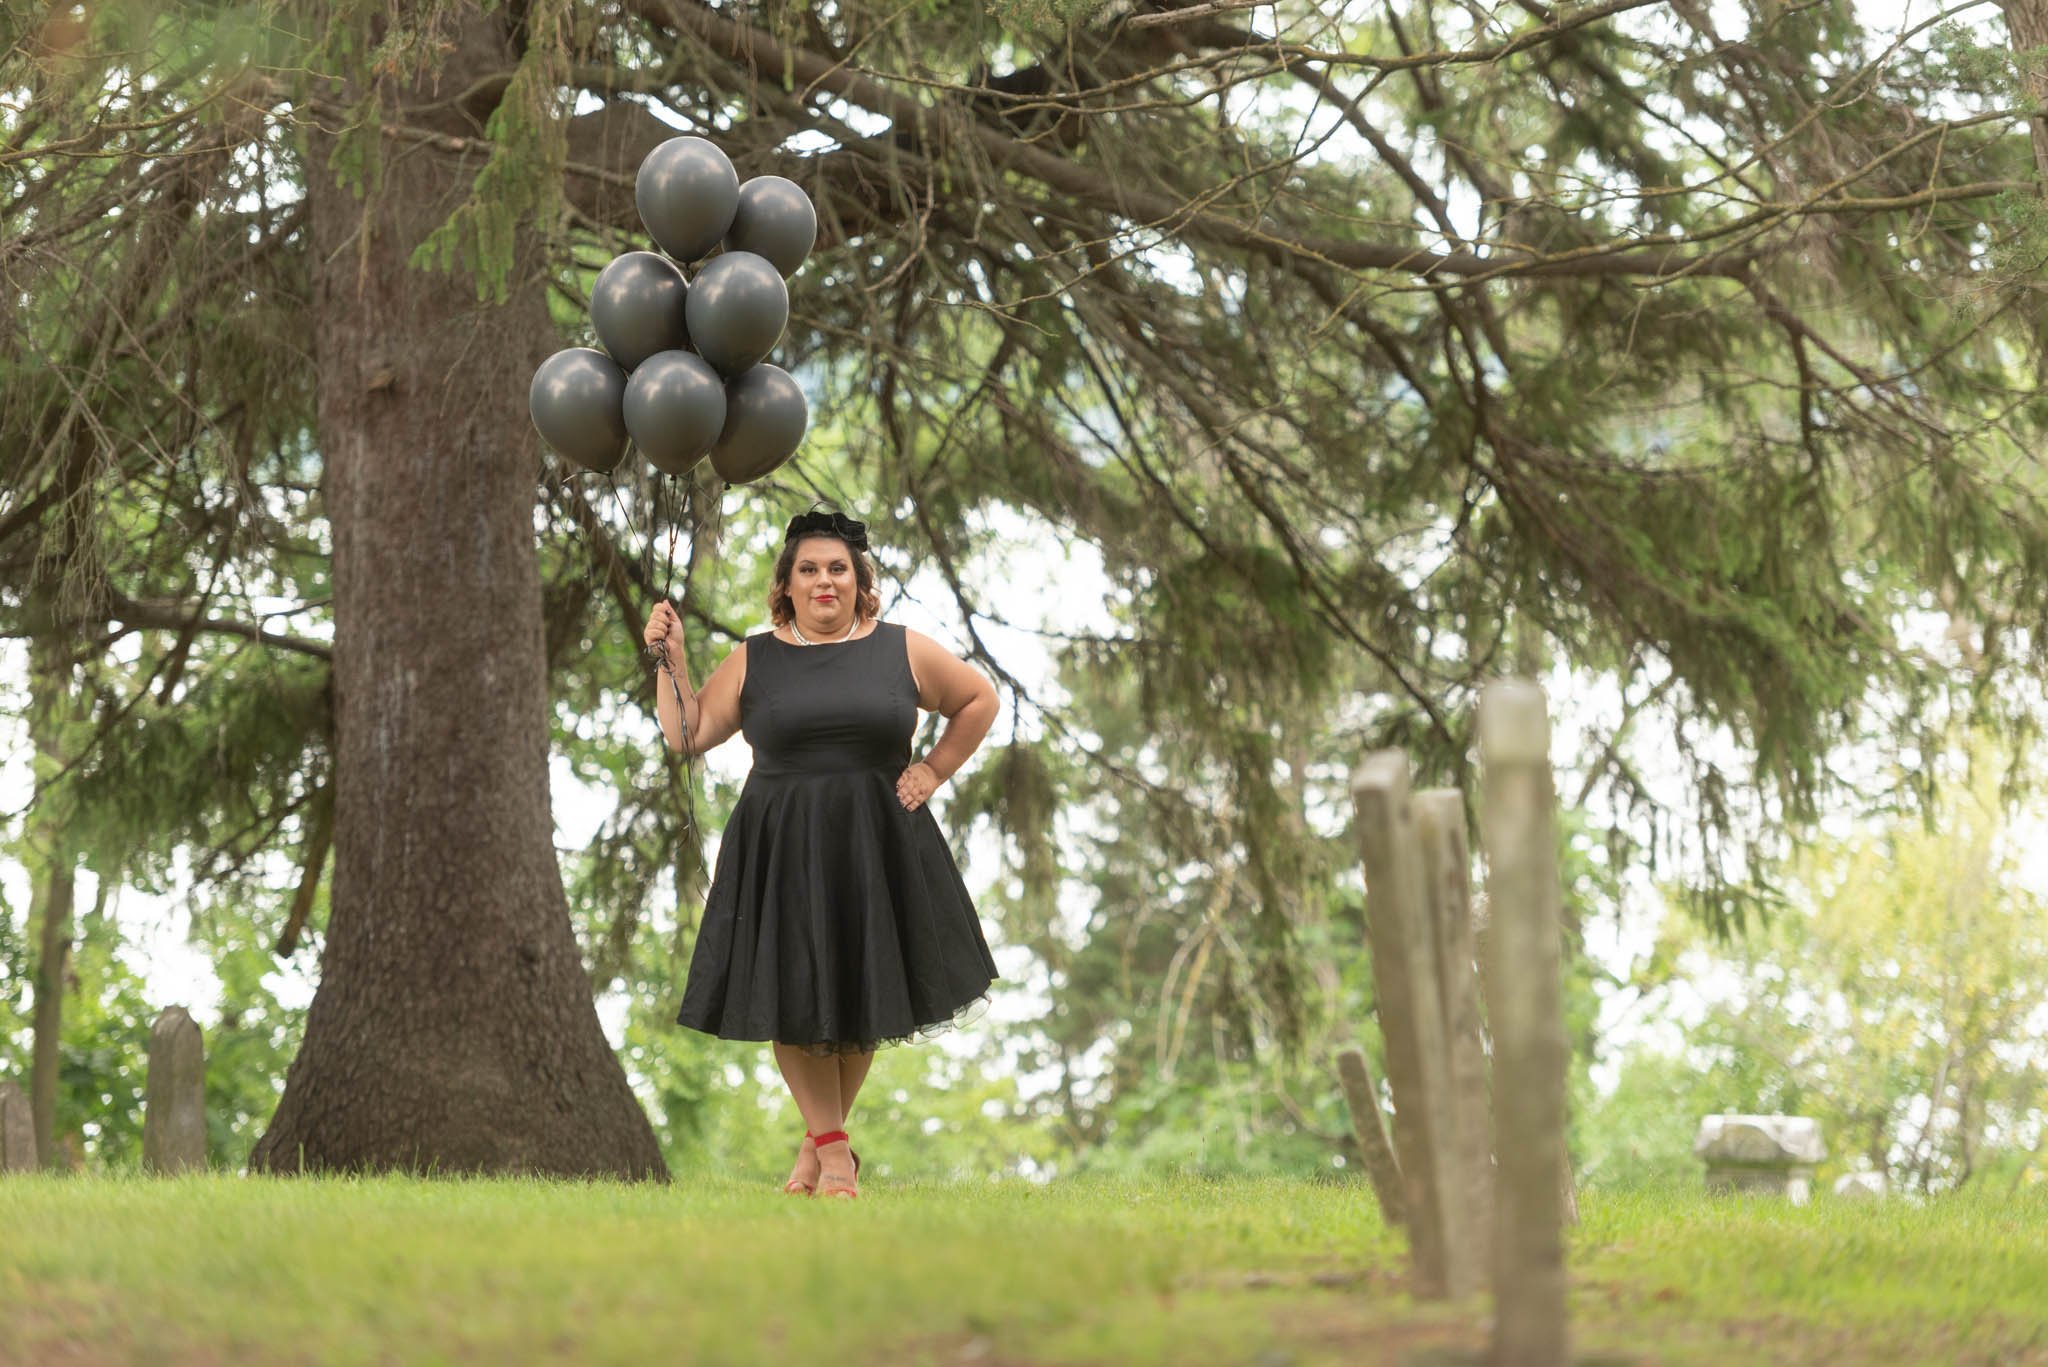  Samantha in black dress and vintage black hat poses in cemetery with black balloons.  